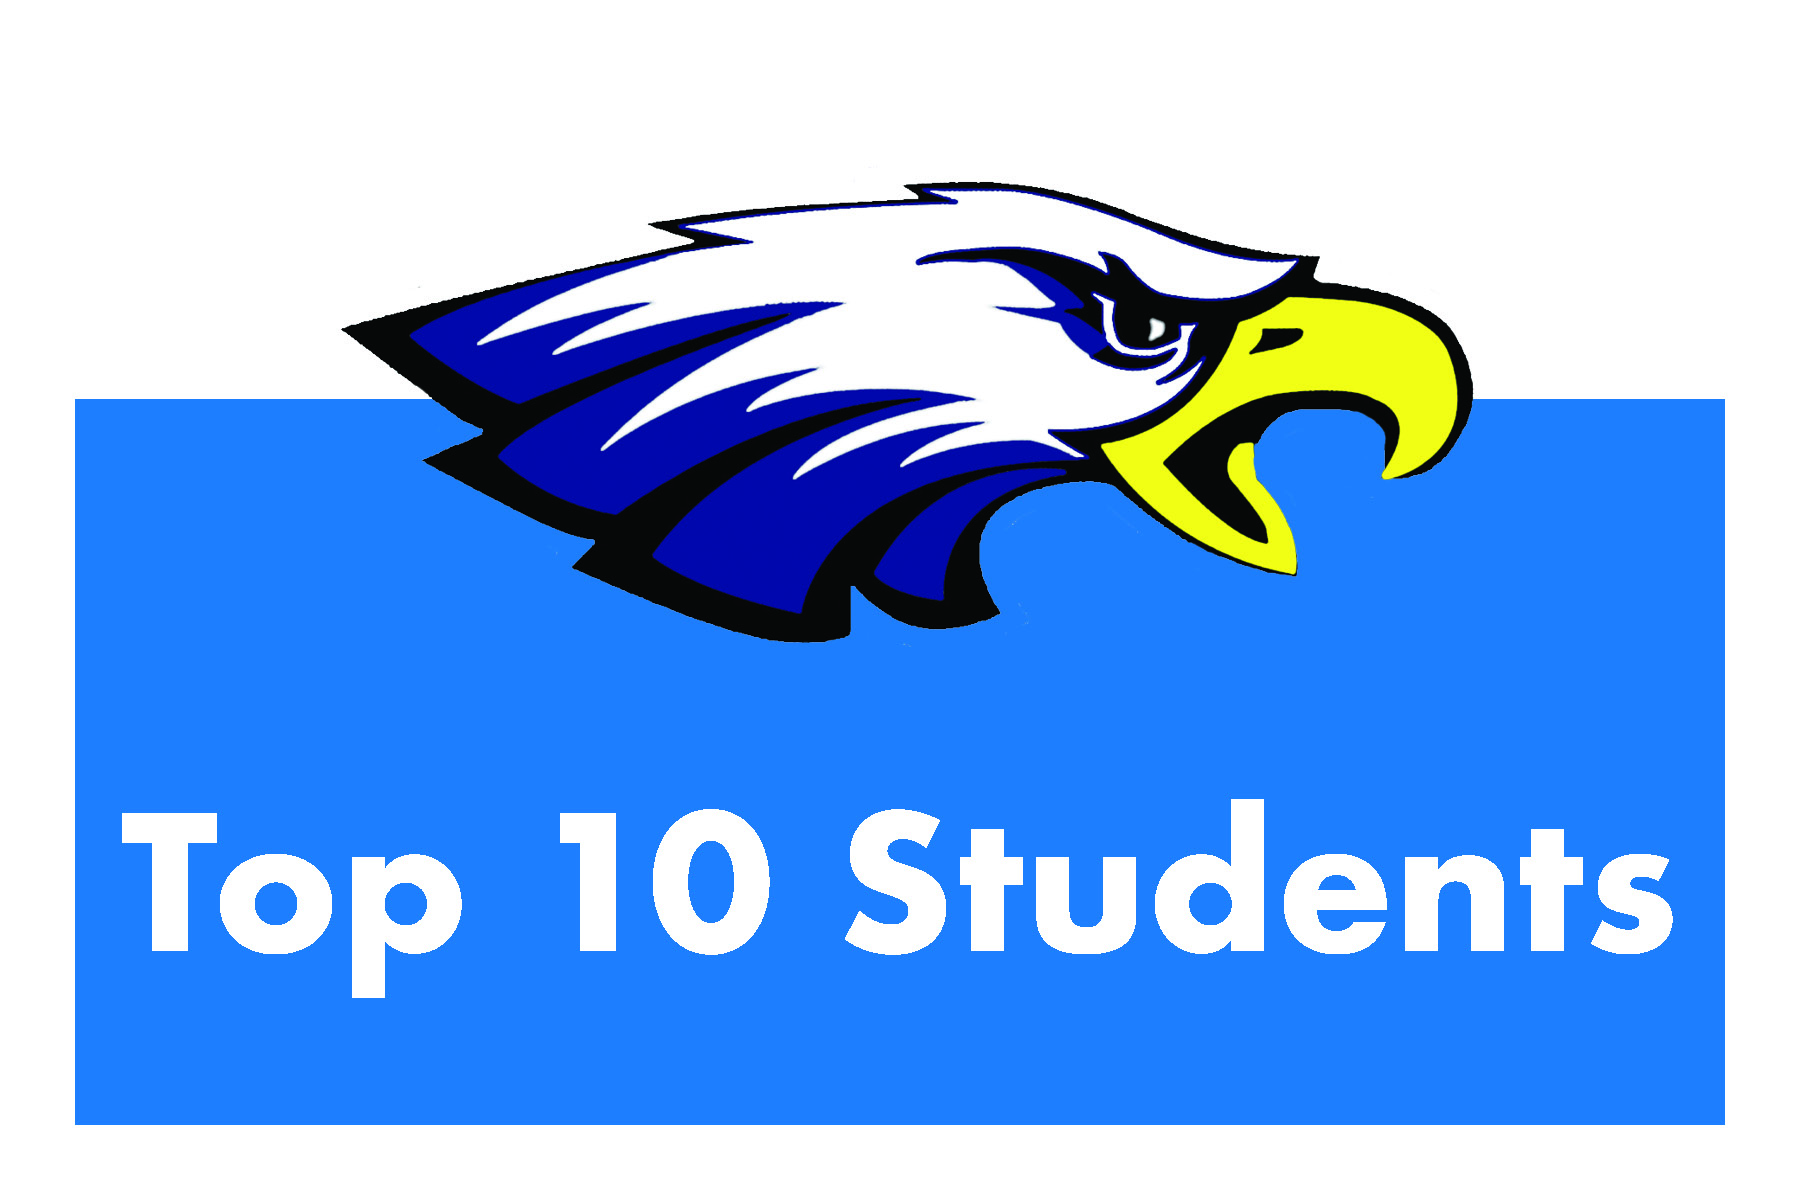 Top 10 Students